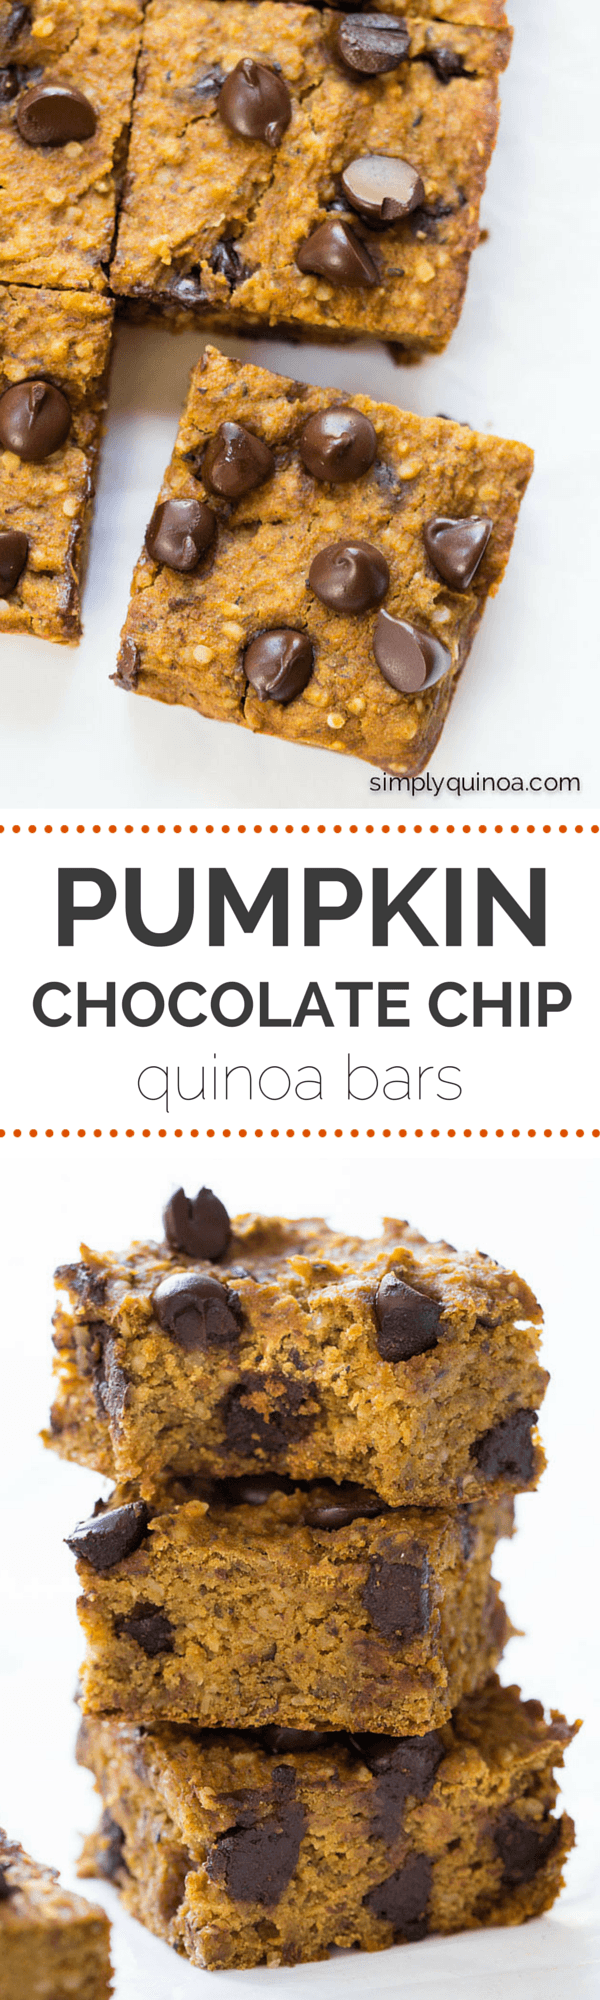 AMAZING pumpkin chocolate chip quinoa bars are packed with protein, naturally sweetened and low in fat! | gluten-free + vegan | simplyquinoa.com